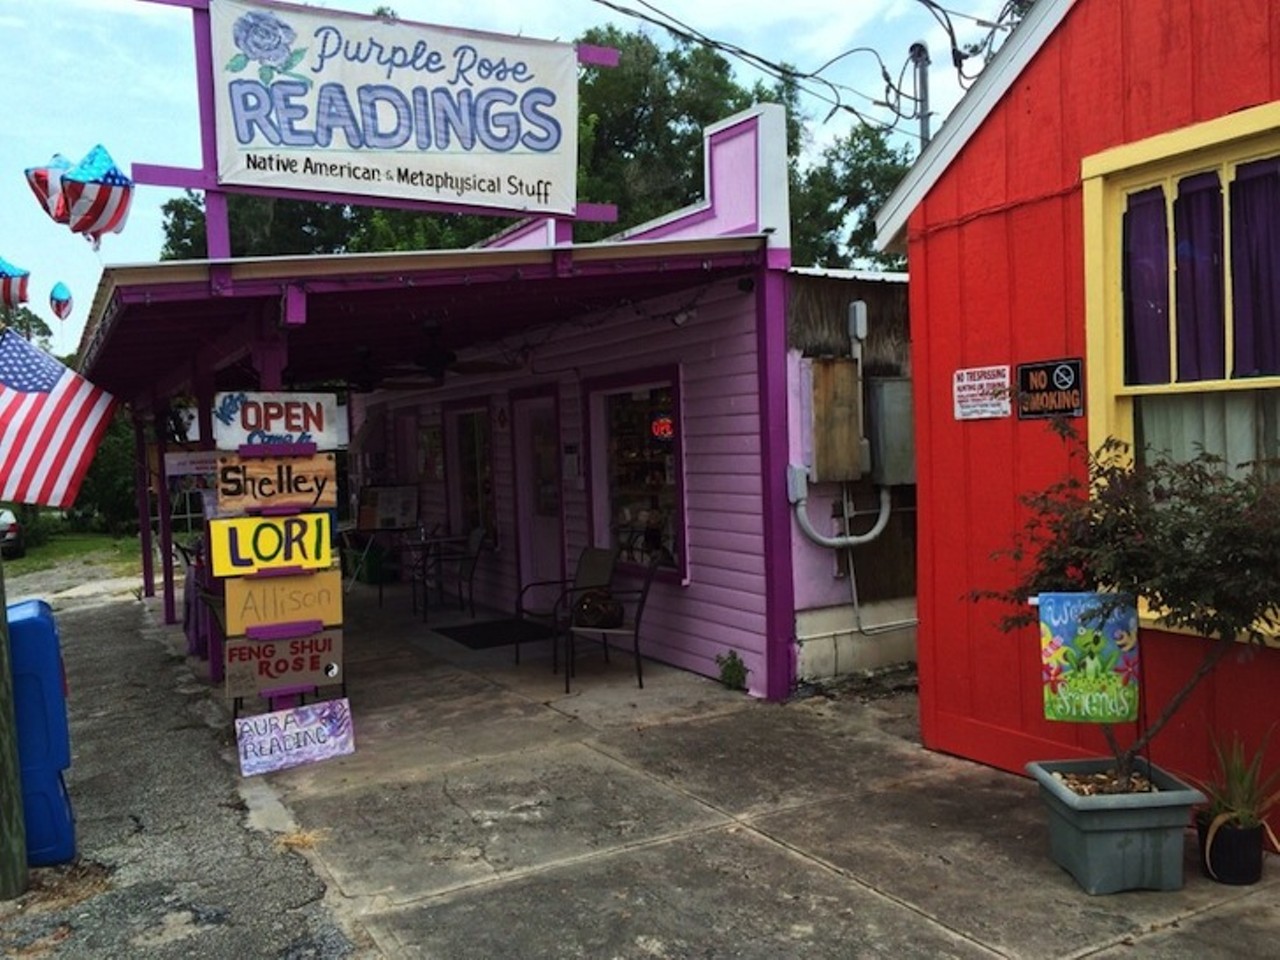 Take a ghost tour of Cassadaga
Cassadaga Spiritualist Camp l 1112 Stevens Street, Cassadaga l (386) 228-2880
Cassadaga is a town known for its mediums, psychics and spiritualists. By day you can have your fortune told or your palm read, but the most fun comes out at night. By the light of a full moon you can walk through the town&#146;s historic buildings looking for energy &#147;hot spots,&#148; where a spirit could just materialize long enough for you to snap a selfie. #callingallghostbusters
Photo via Arianna Nicolette S./Yelp